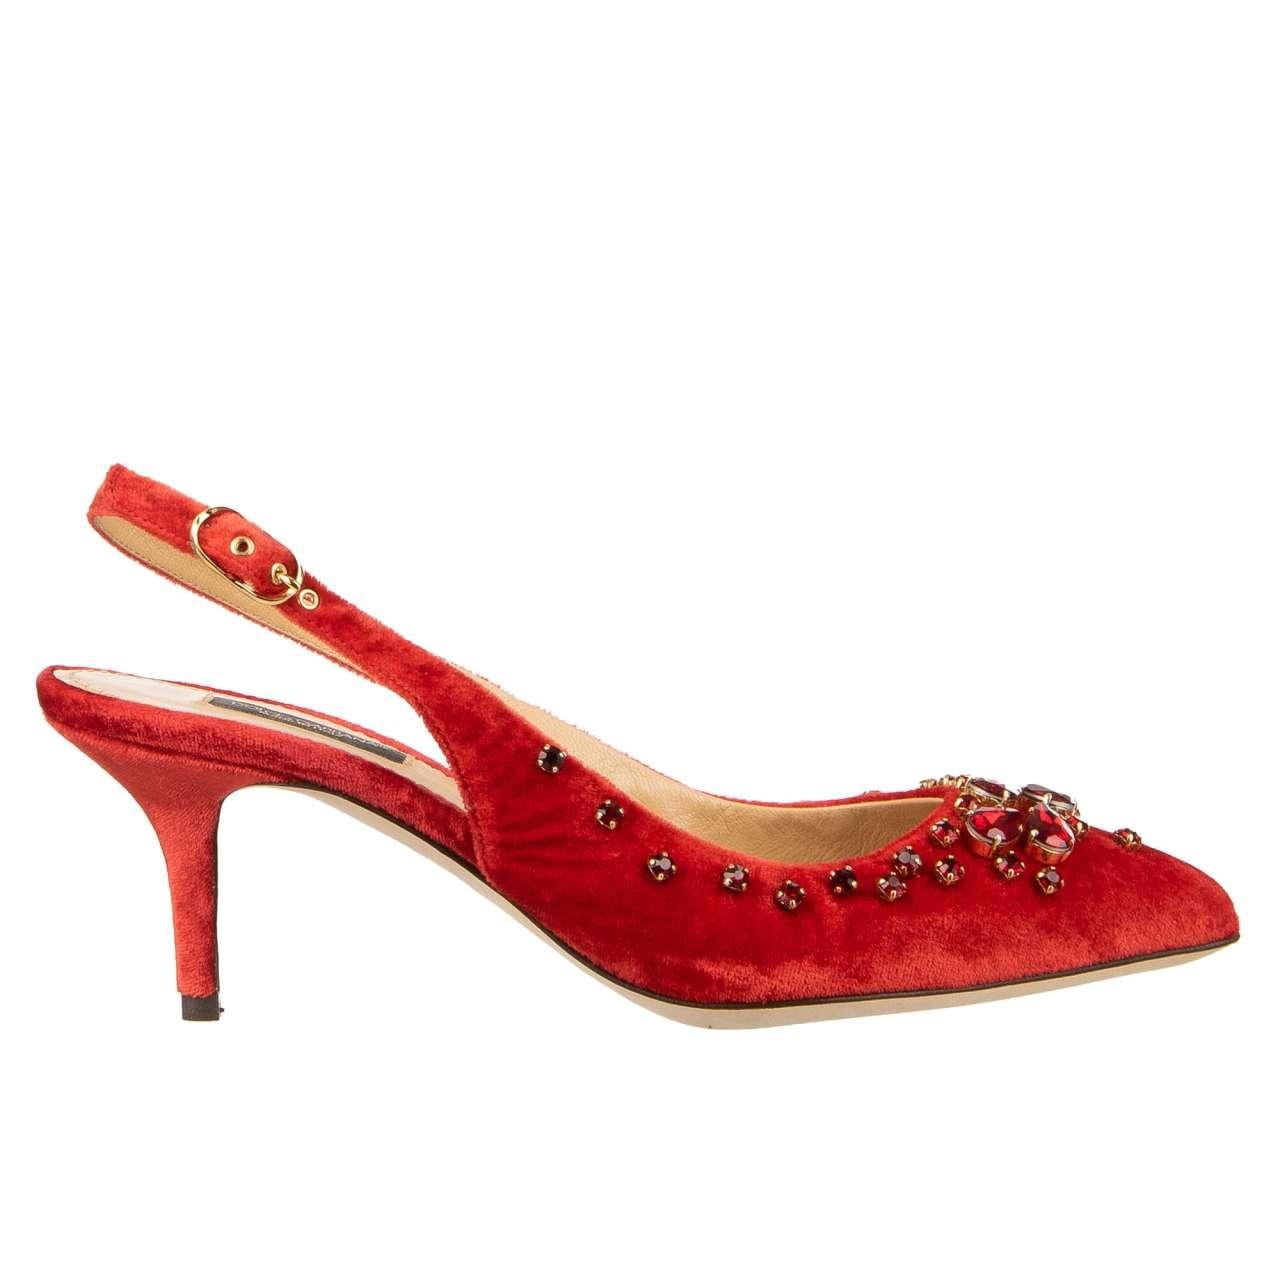 - Pointed Silk Blend Velvet Slingbacks Pumps BELLUCCI with Crystals Embroidery in red by DOLCE & GABBANA - New with Box - MADE IN ITALY - Model: C18148-B9641-80303 - Material: 78% Viscose, 22% Silk - Inner Material: leather - Sole: Leather - Color: